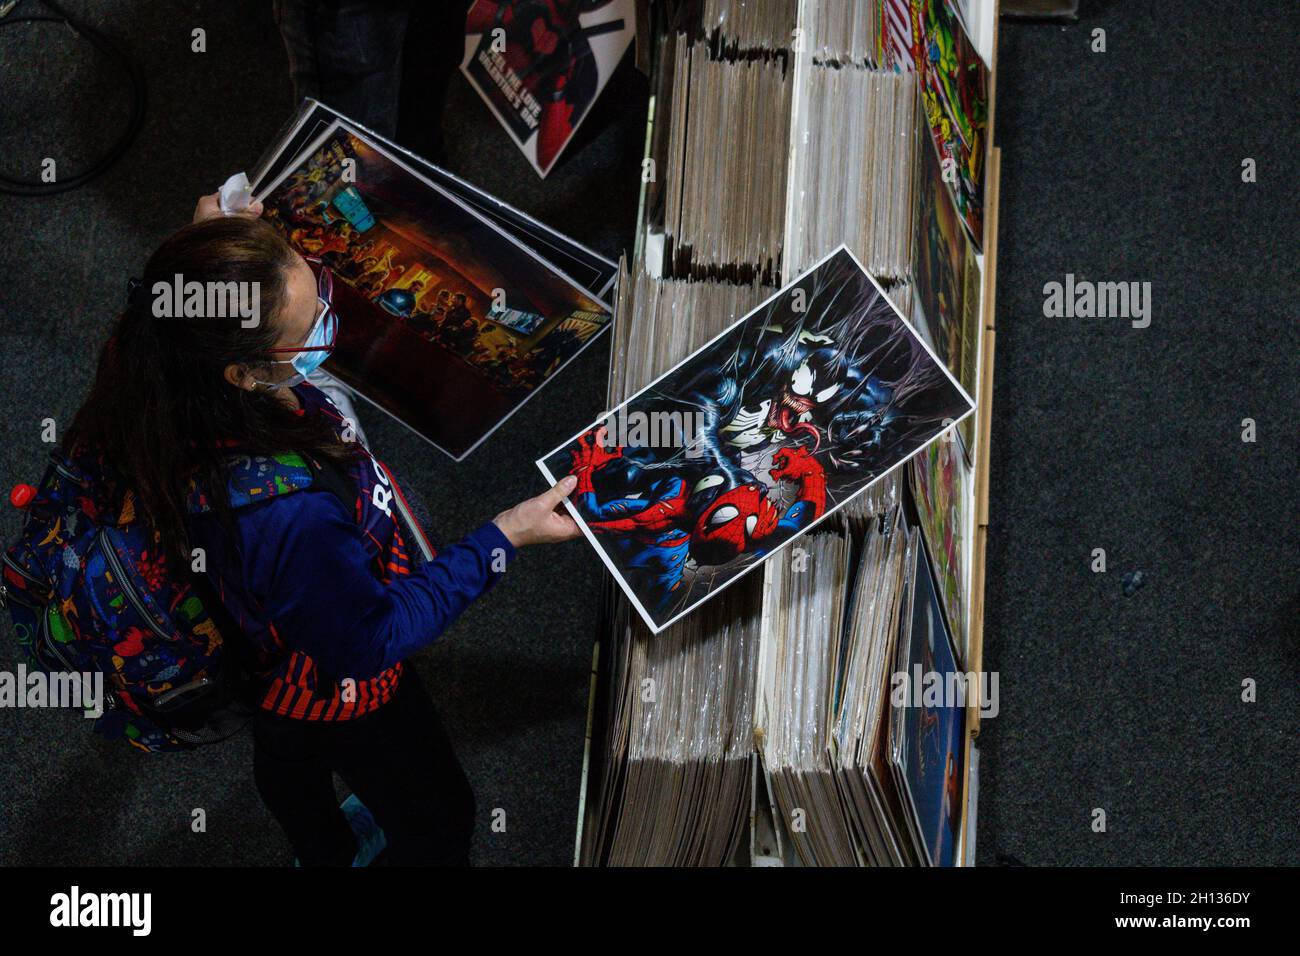 An event goer picks up a poster of 'Venom and Spiderman' during the first day of the SOFA (Salon del Ocio y la Fantasia) 2021, a fair aimed to the geek audience in Colombia that mixes Cosplay, gaming, superhero and movie fans from across Colombia, in Bogota, Colombia on October 14, 2021. Stock Photo